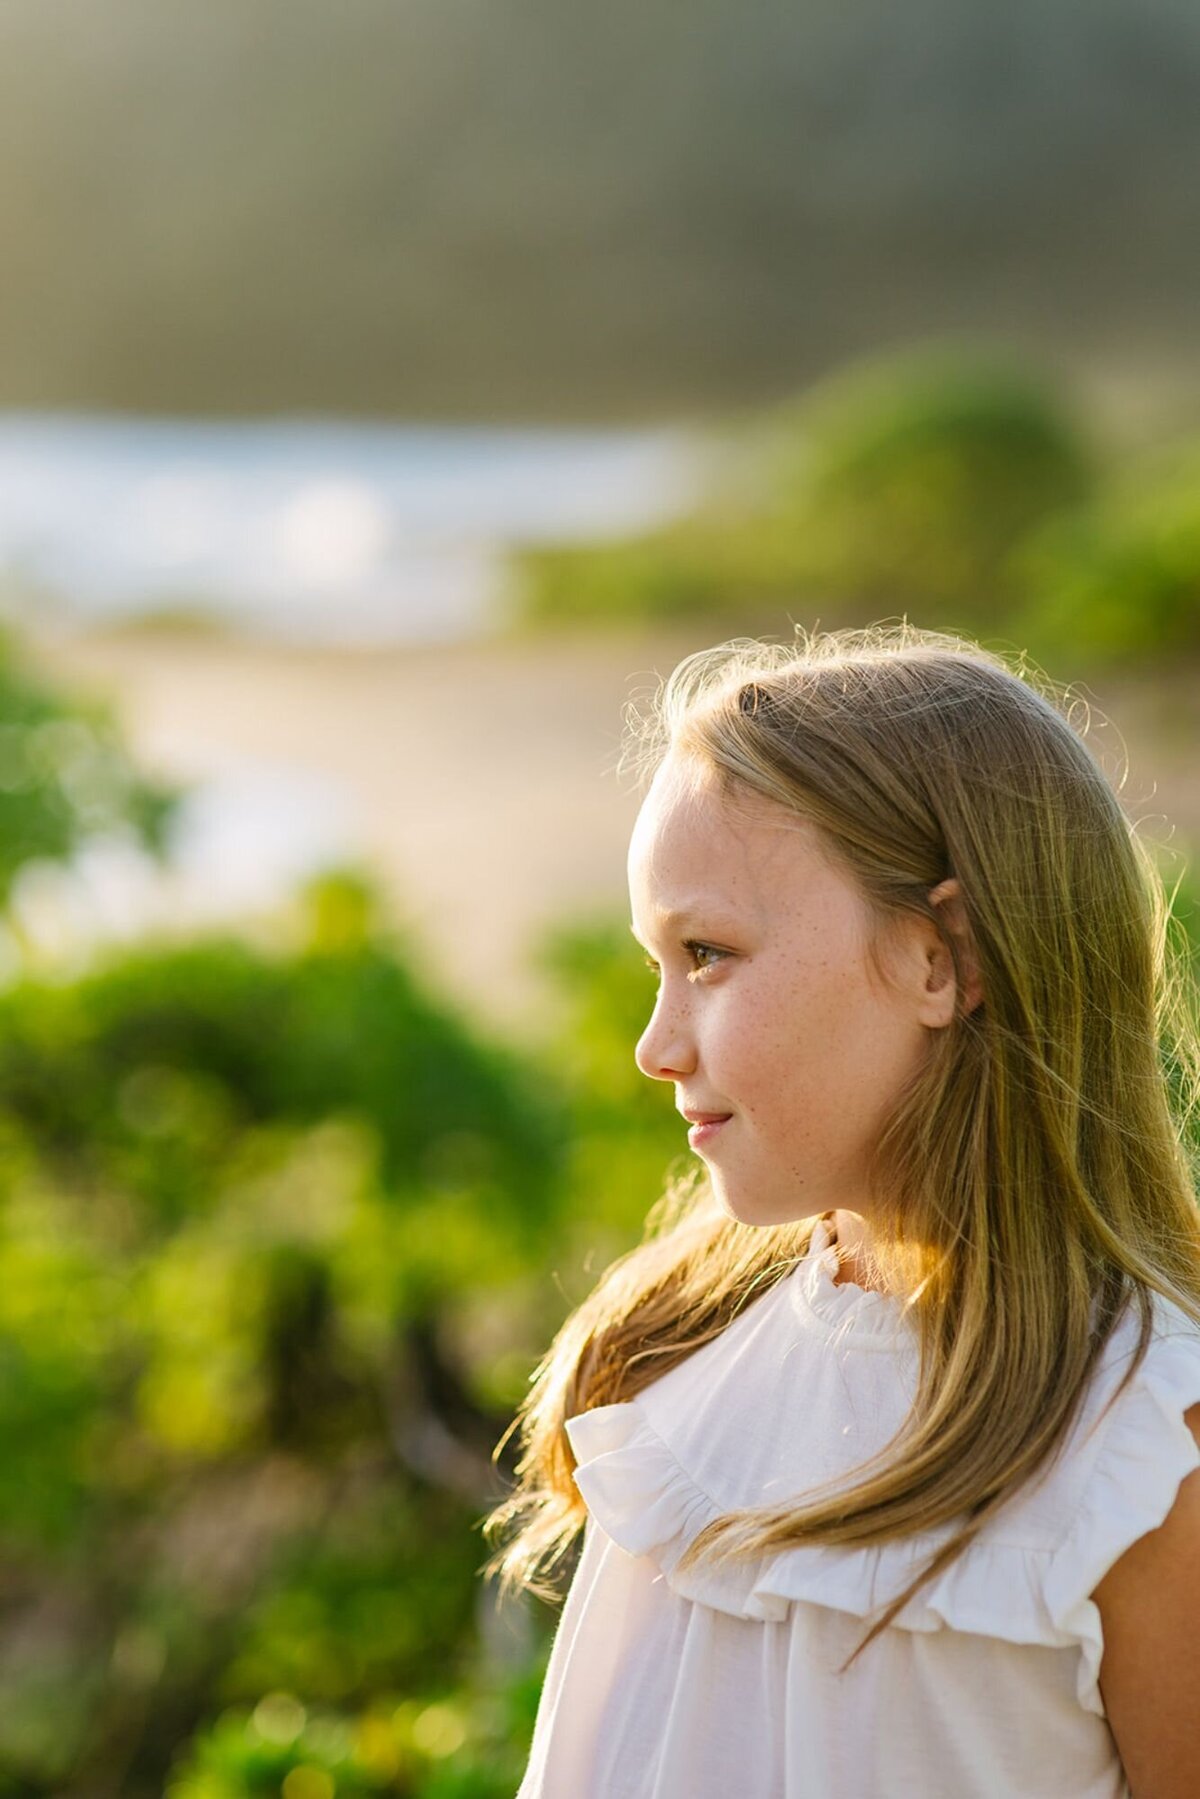 A young girl looks out in the distance on a beach.